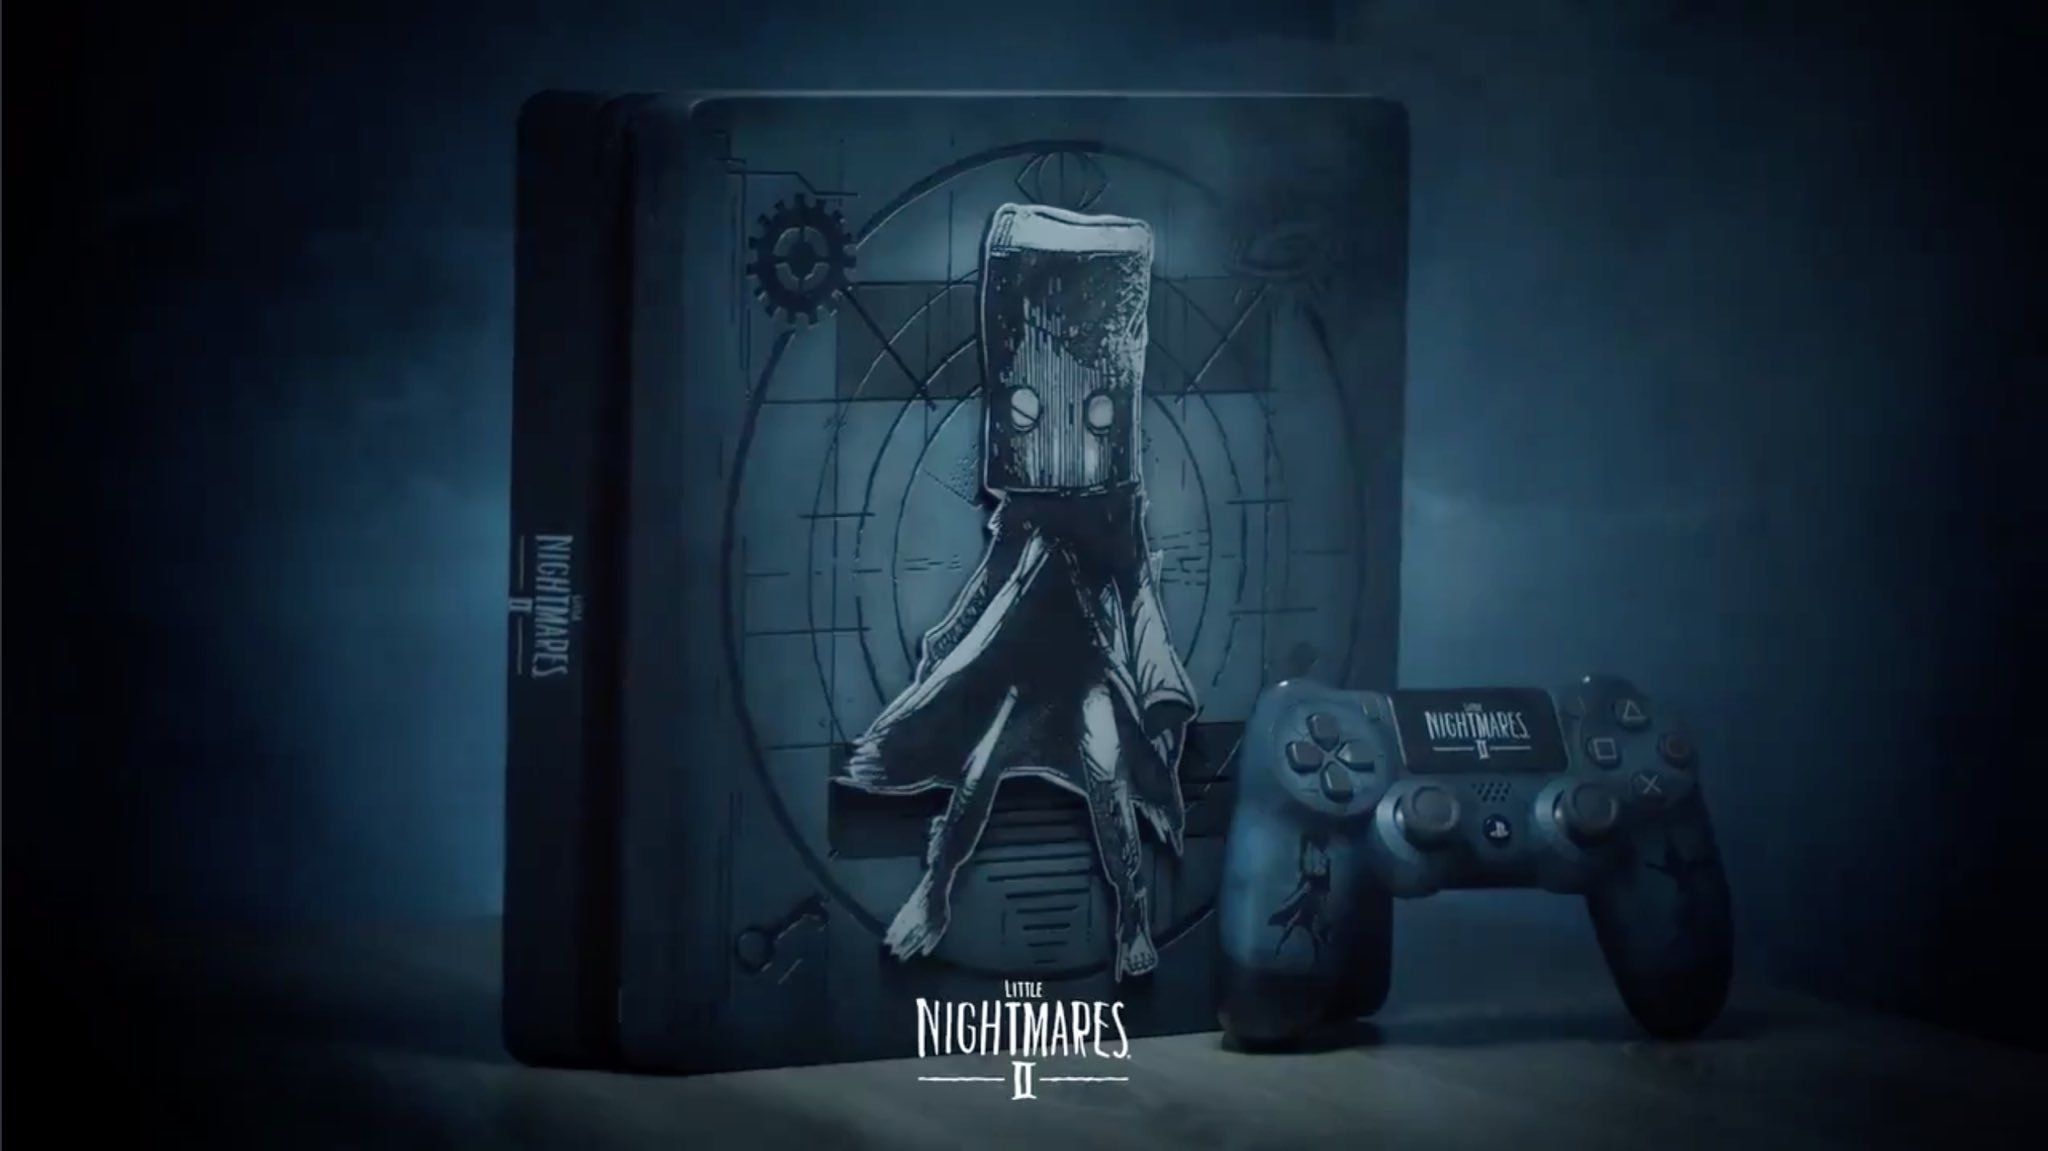 A unique customized PS4 to be won for Little Nightmares II